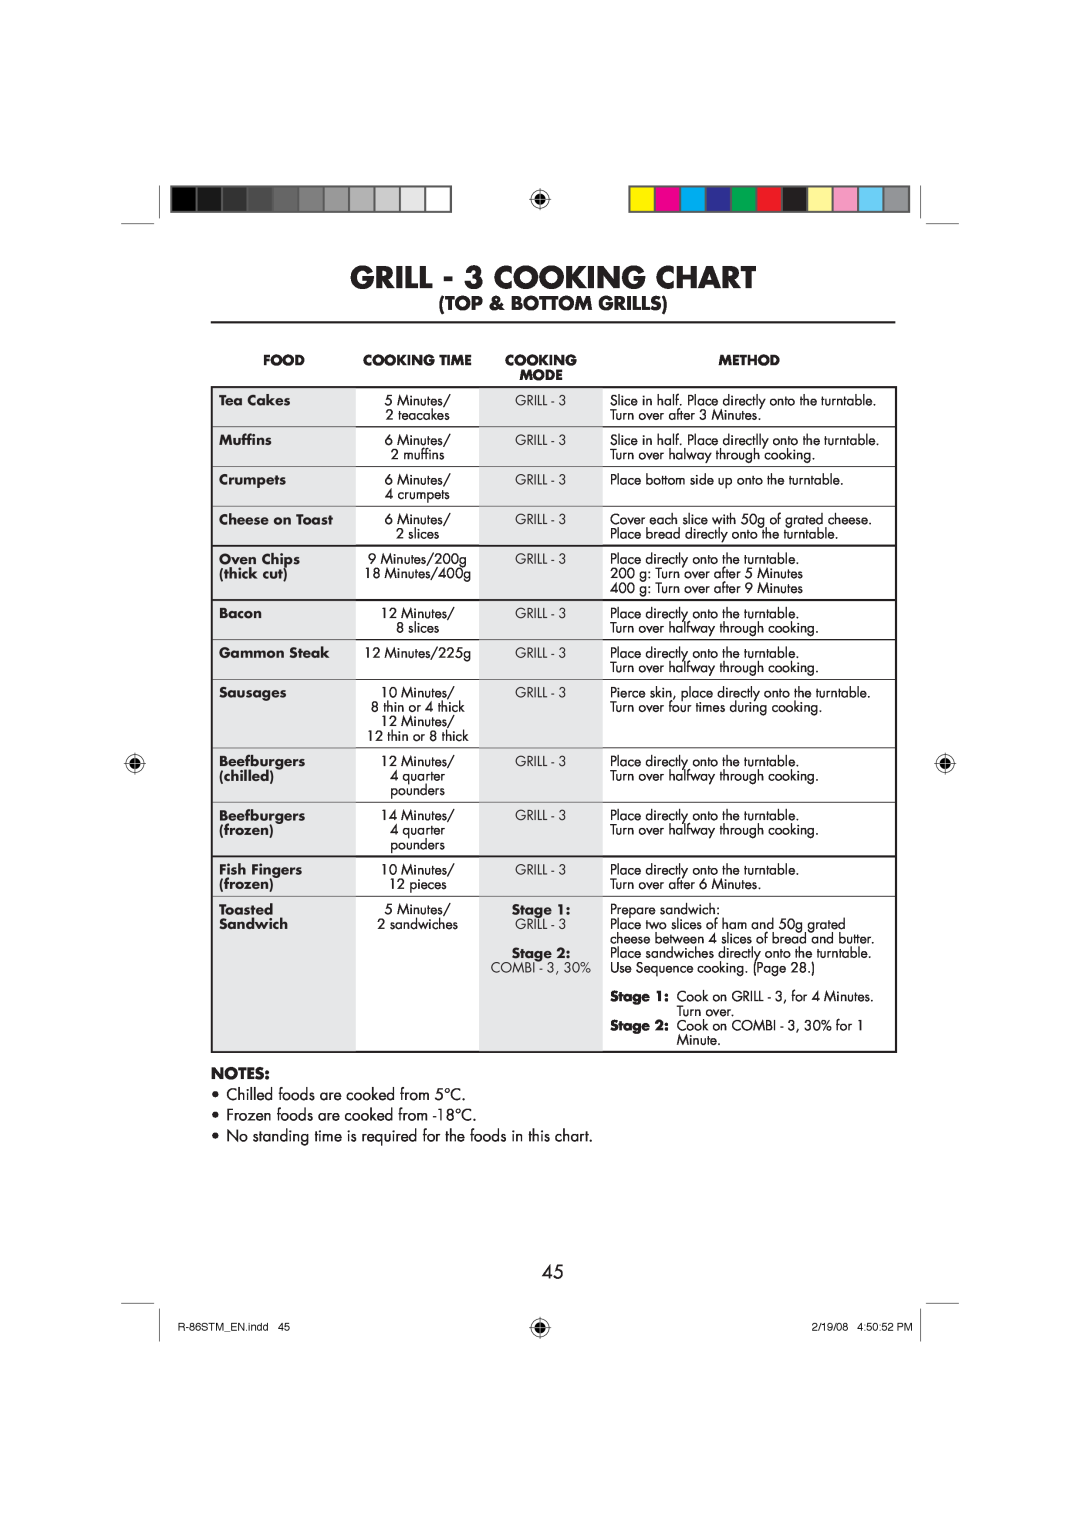 Sharp R-86STM manual GRILL - 3 COOKING CHART, Top & Bottom Grills 